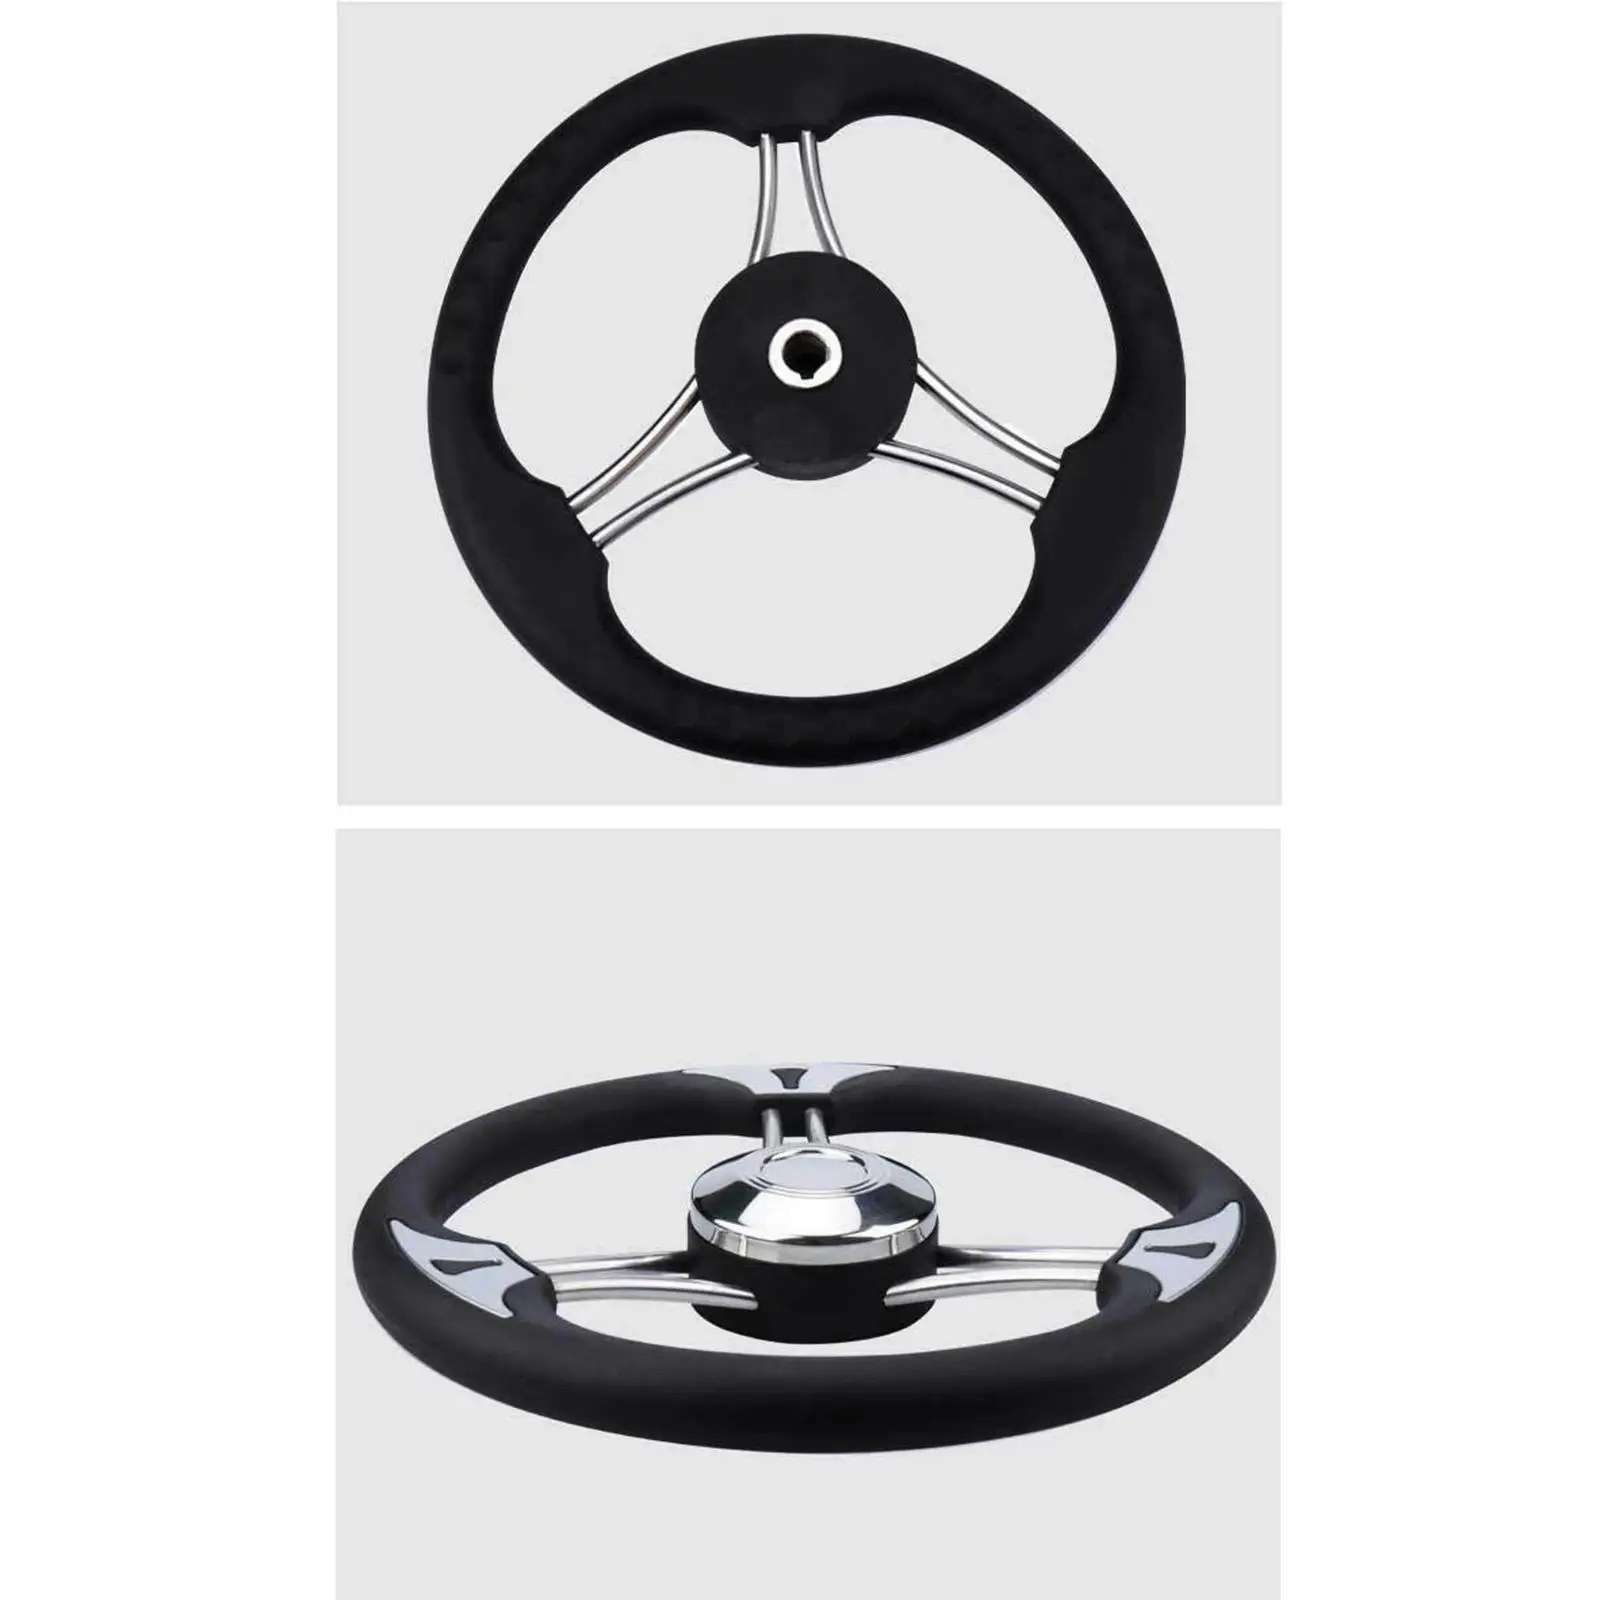 steering-wheel-non-slip-premium-six-bar-support-rubber-durable-sturdy-professional-stainless-steel-135inch-boat-accessories